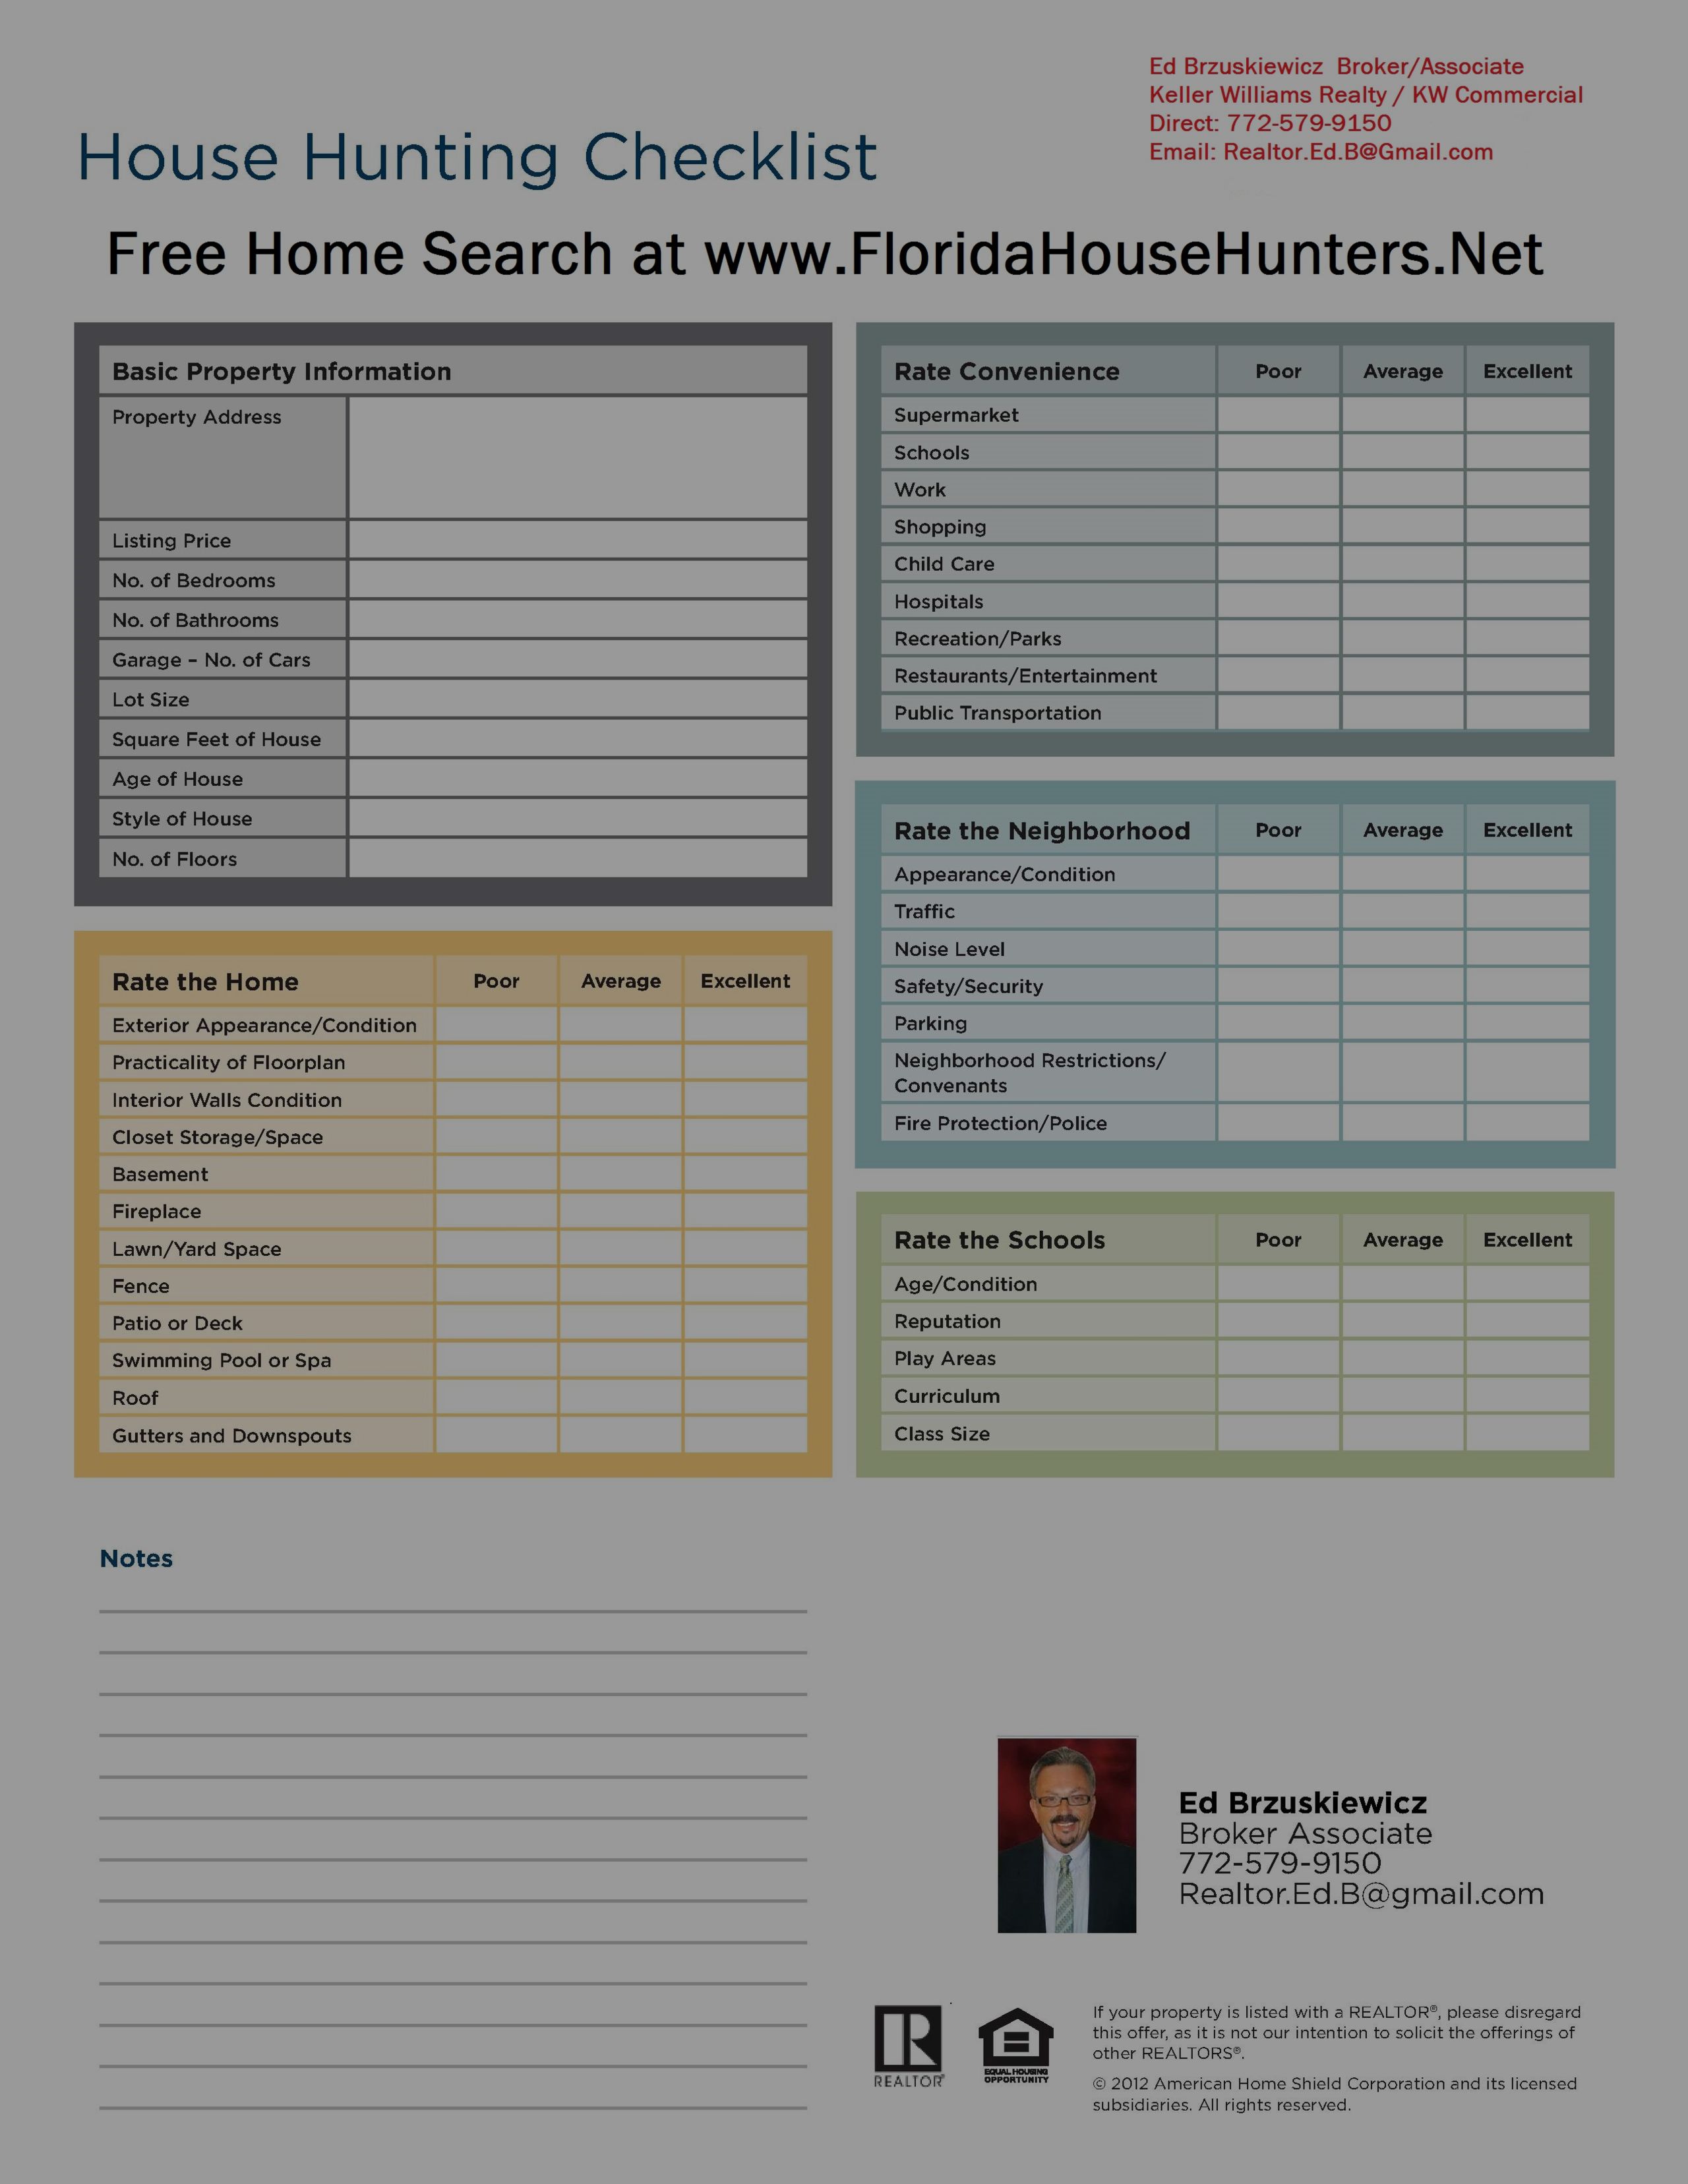 Free House Hunting Checklist to Help with Home Serach.